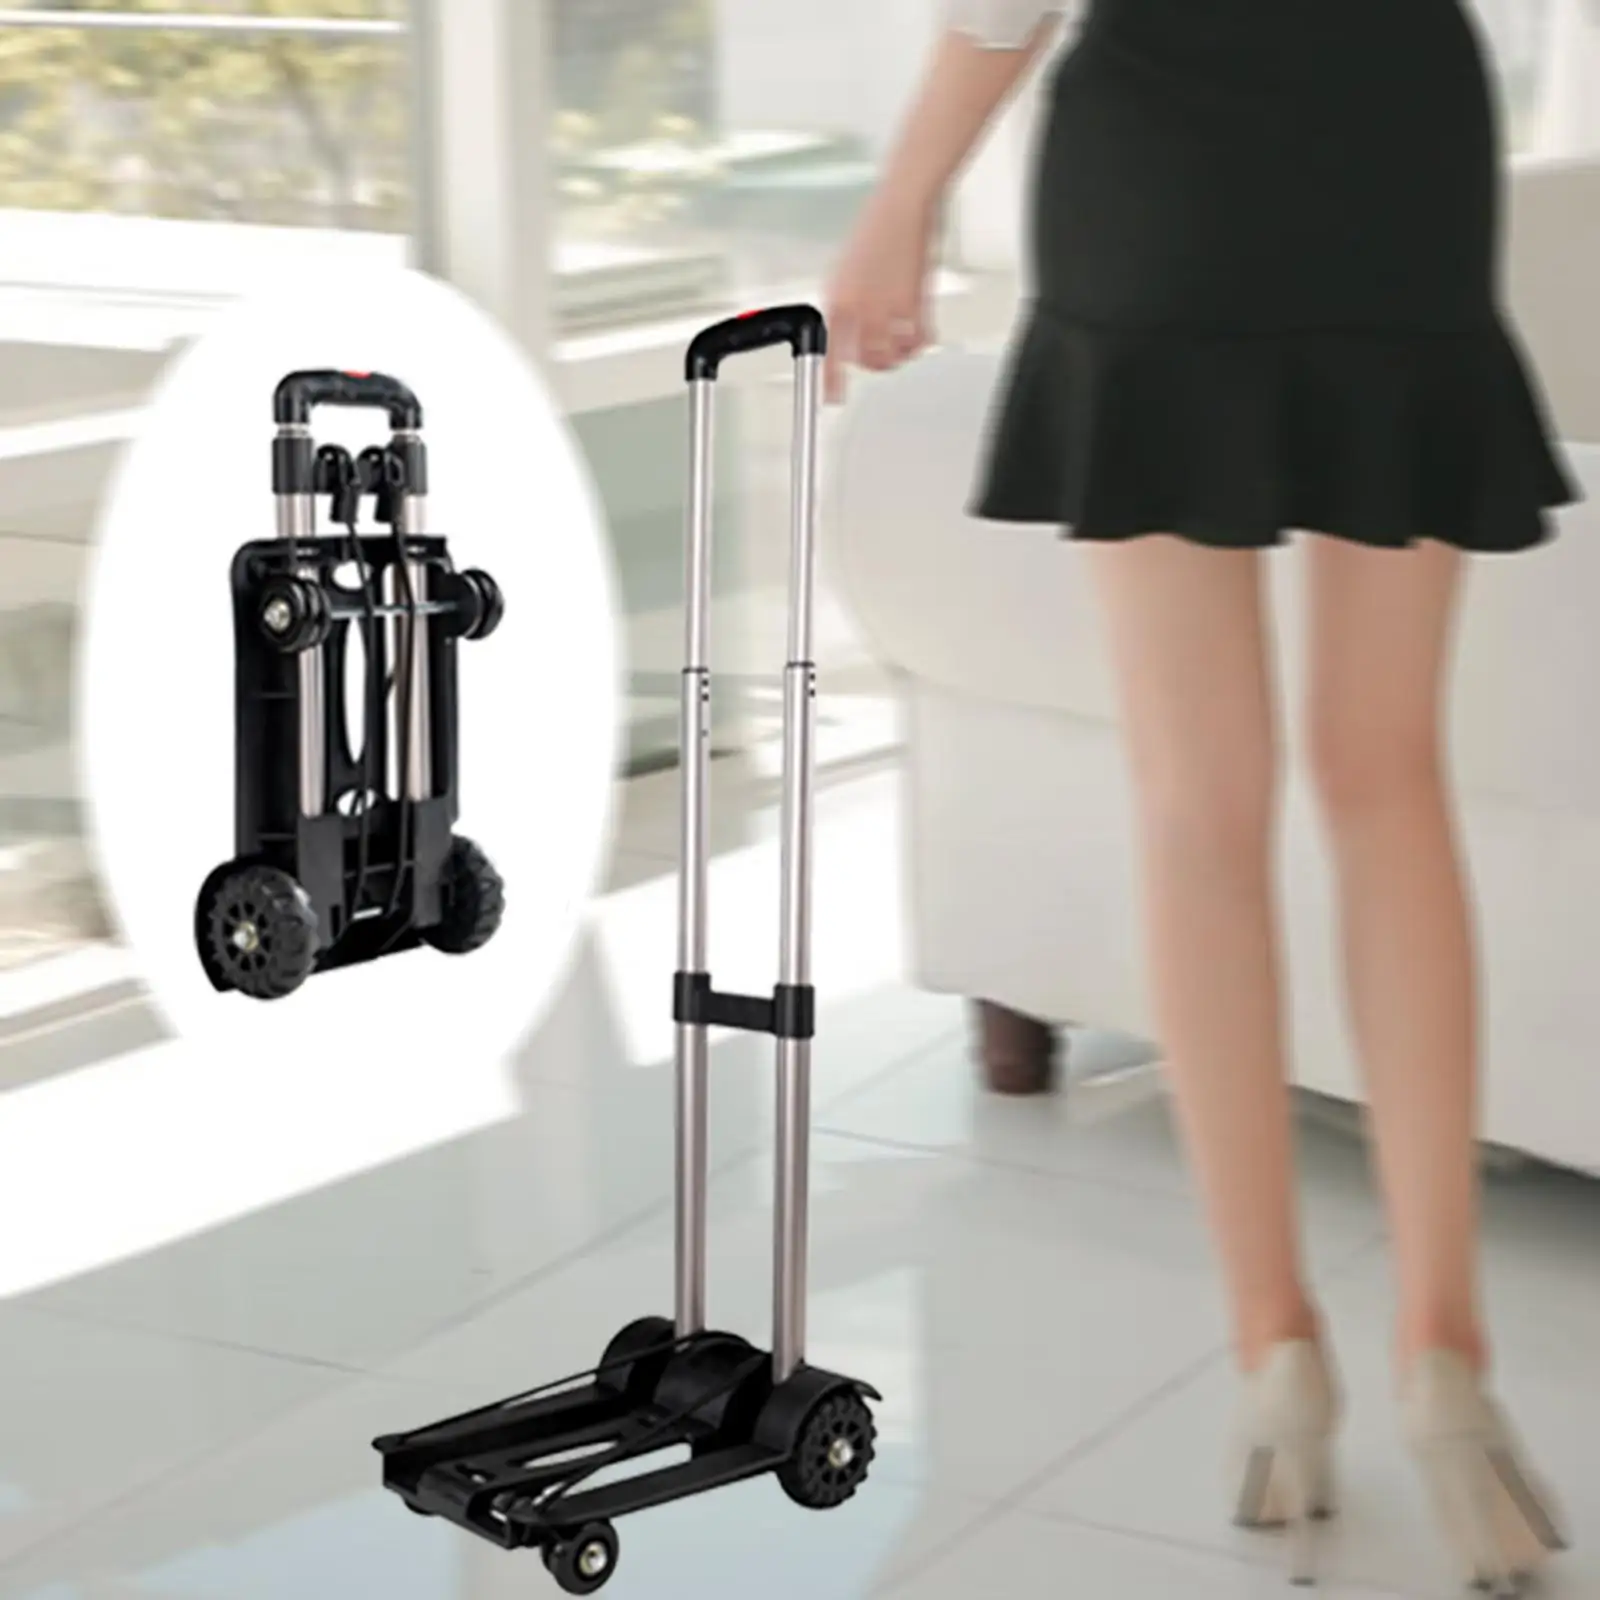 Folding Hand Truck with Telescopic Handle Foldable Hand Cart Foldable Shopping Cart for Stair Climbing Moving Household Shopping